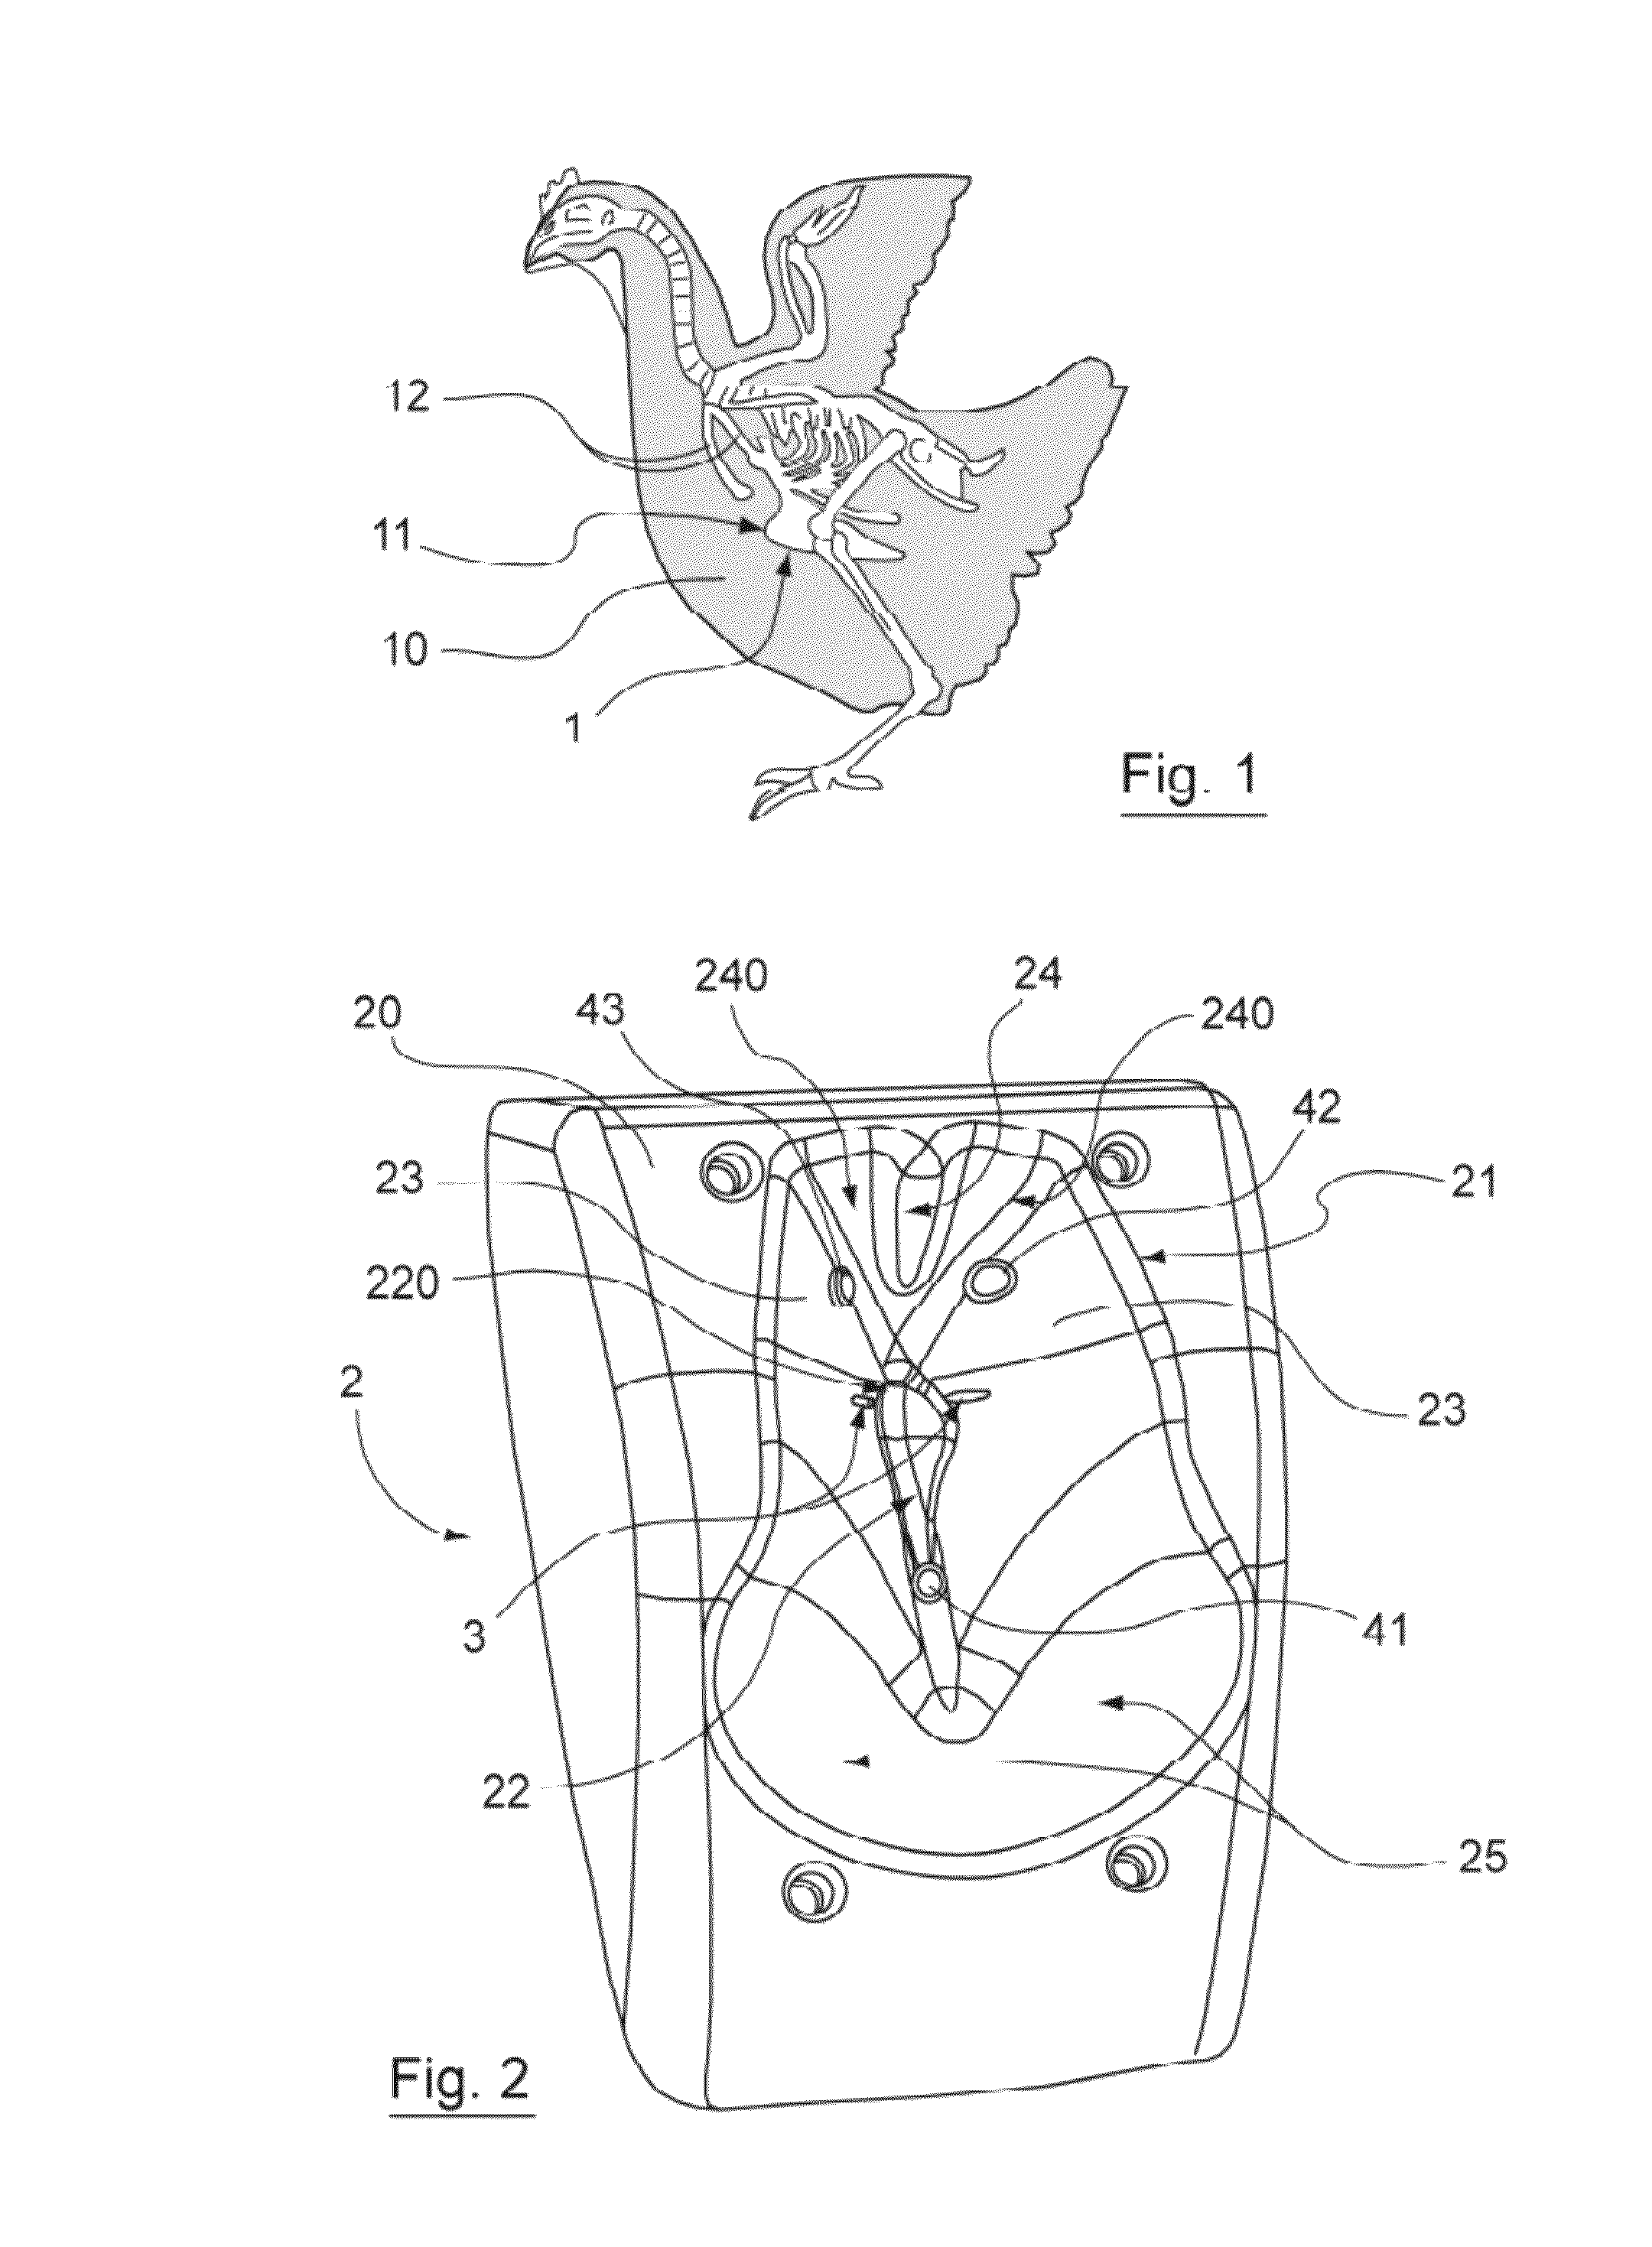 Device for injecting veterinary products to poultry including a retention member having an anatomic form with means for bracing a detectable bone